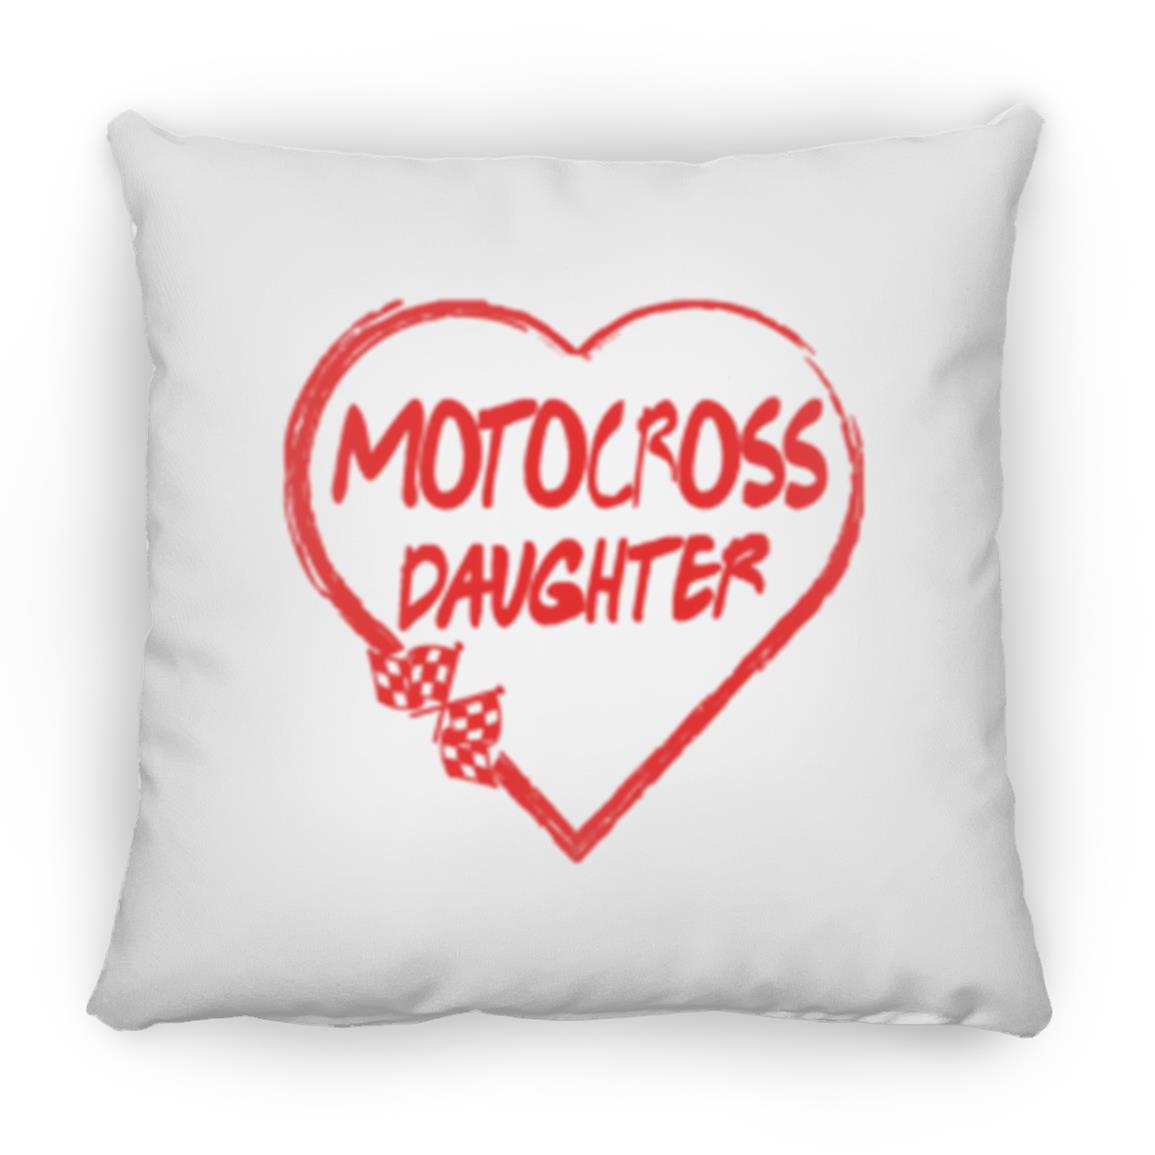 Motocross Daughter Heart Small Square Pillow